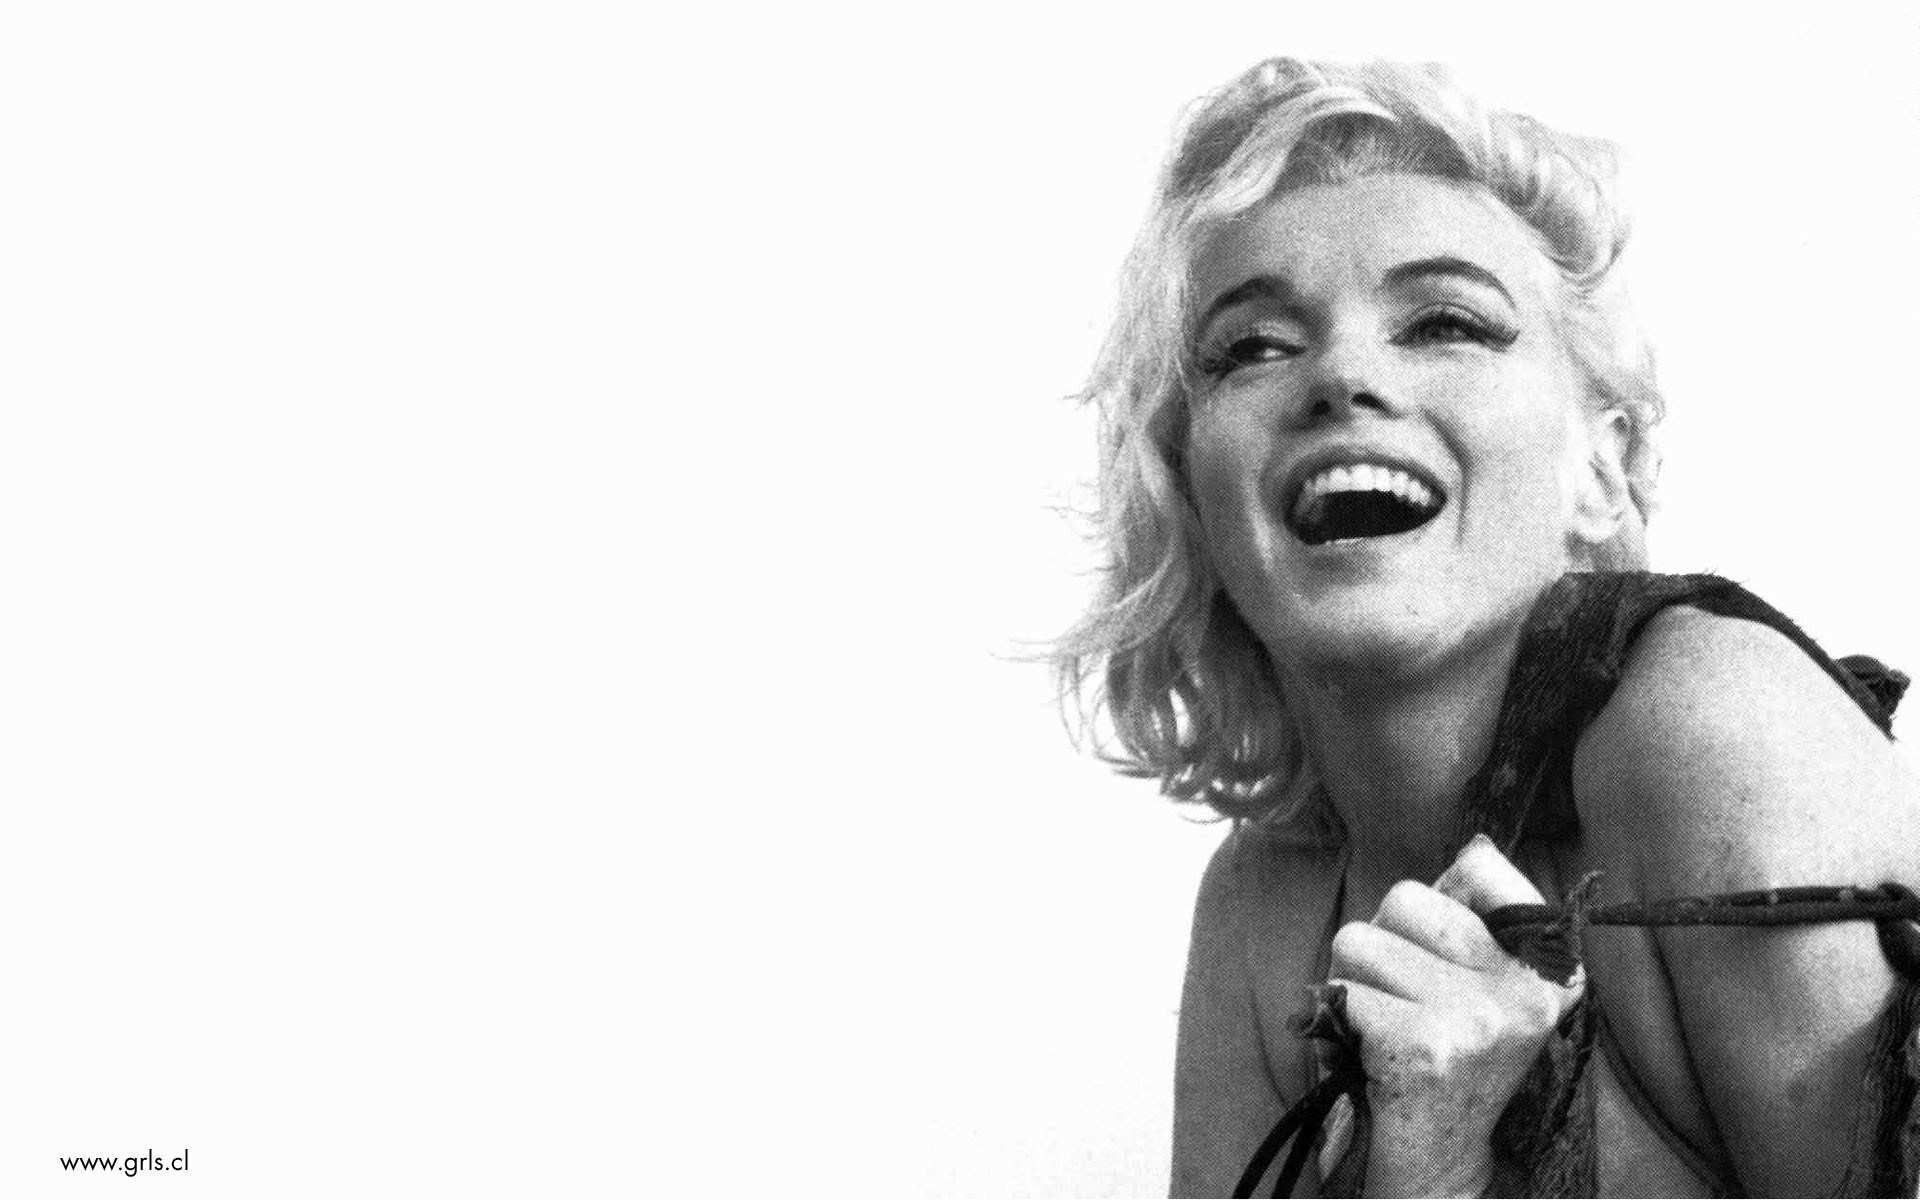 Marilyn Monroe Wallpapers High Resolution And Quality - I M Good But I M Not An Angel - HD Wallpaper 